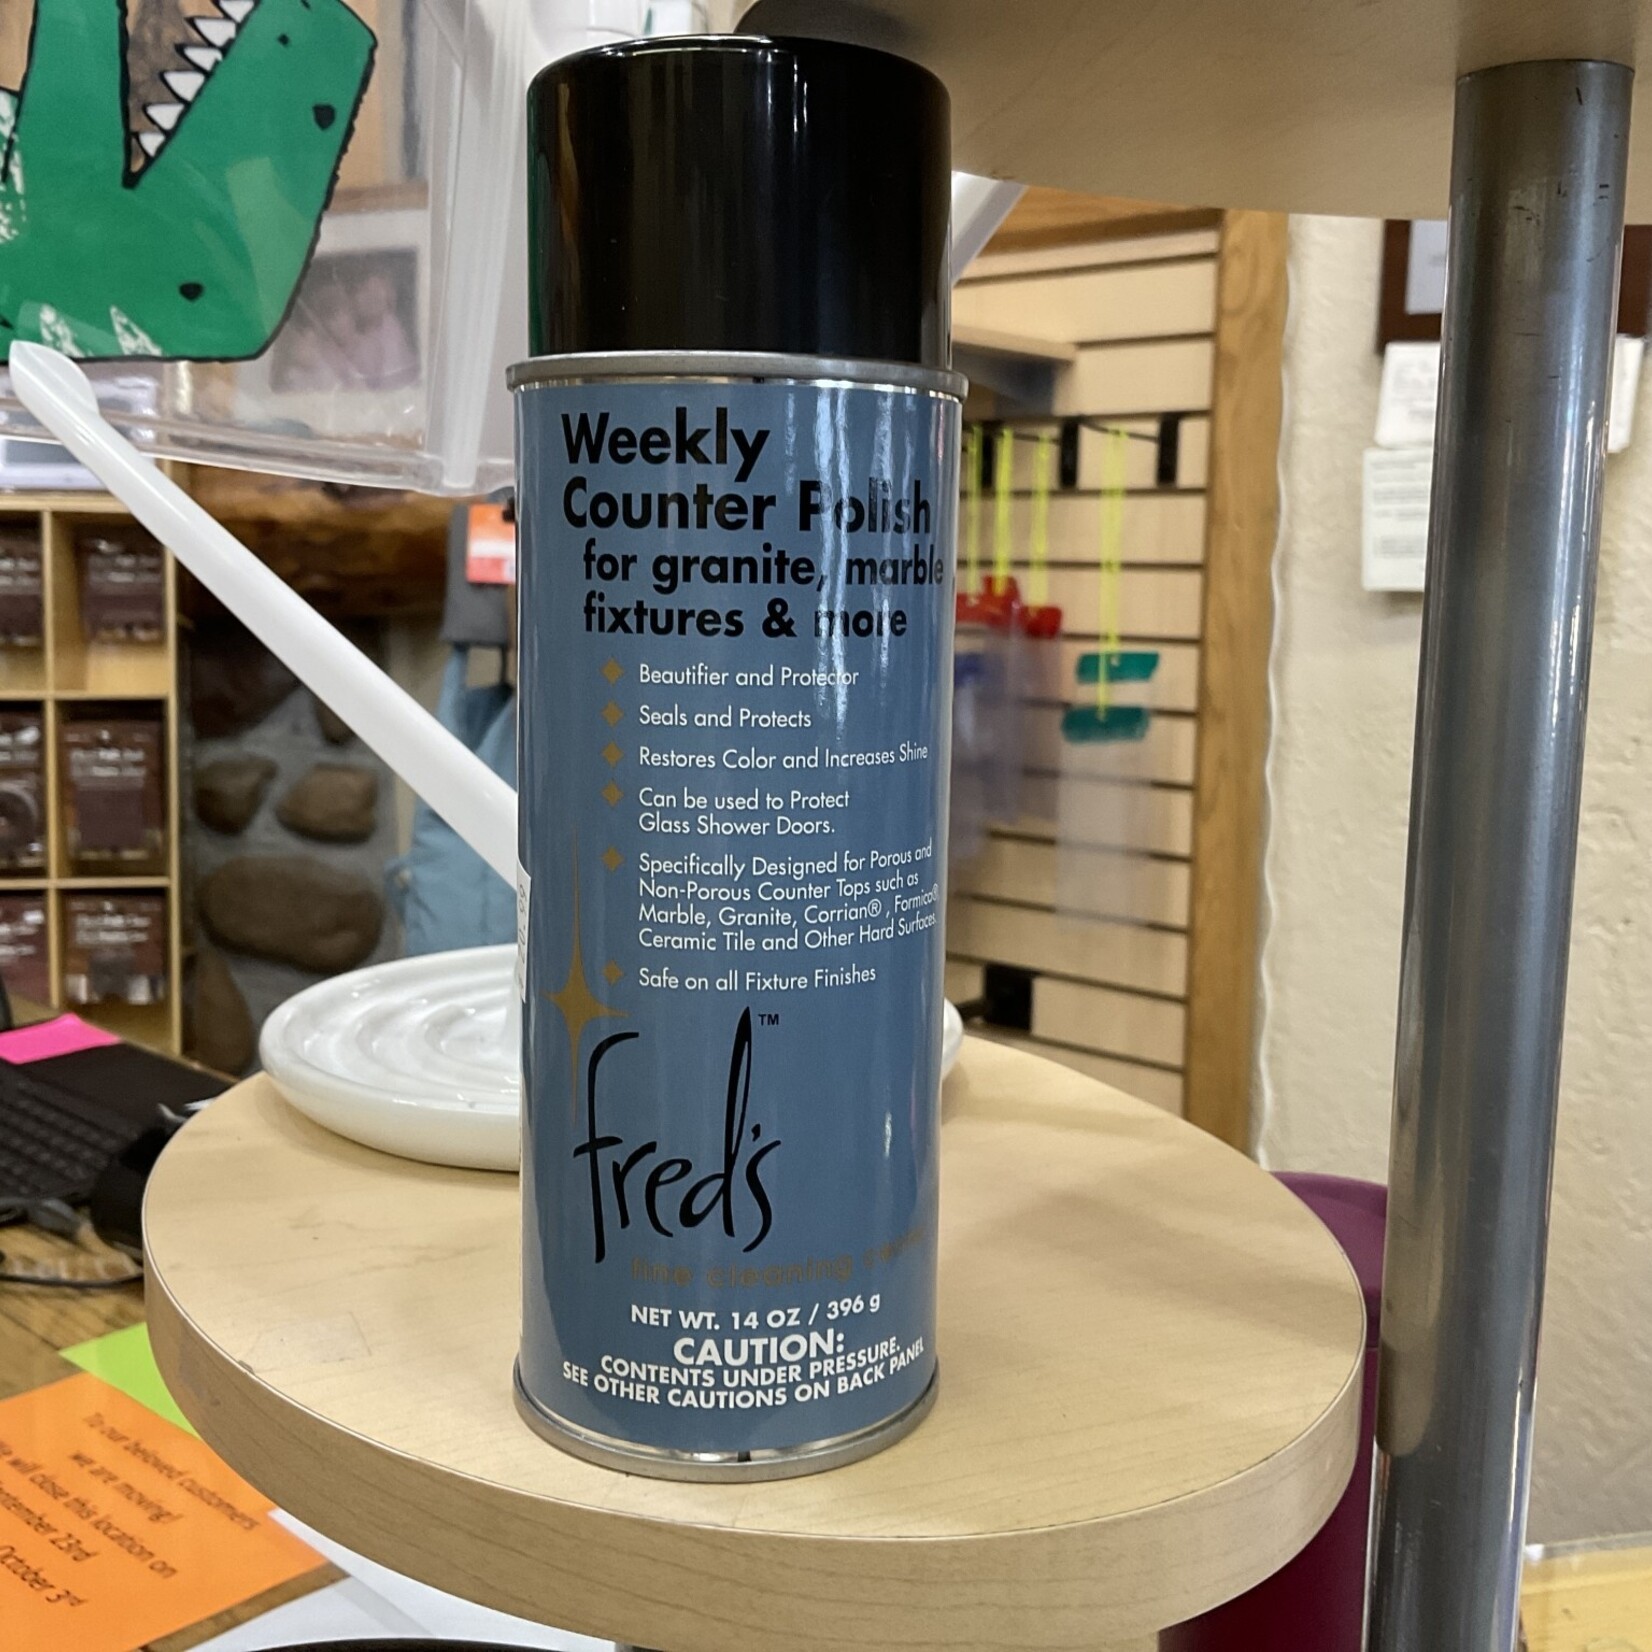 Fred’s Weekly Counter Polish for granite marble fixtures & more 14 oz